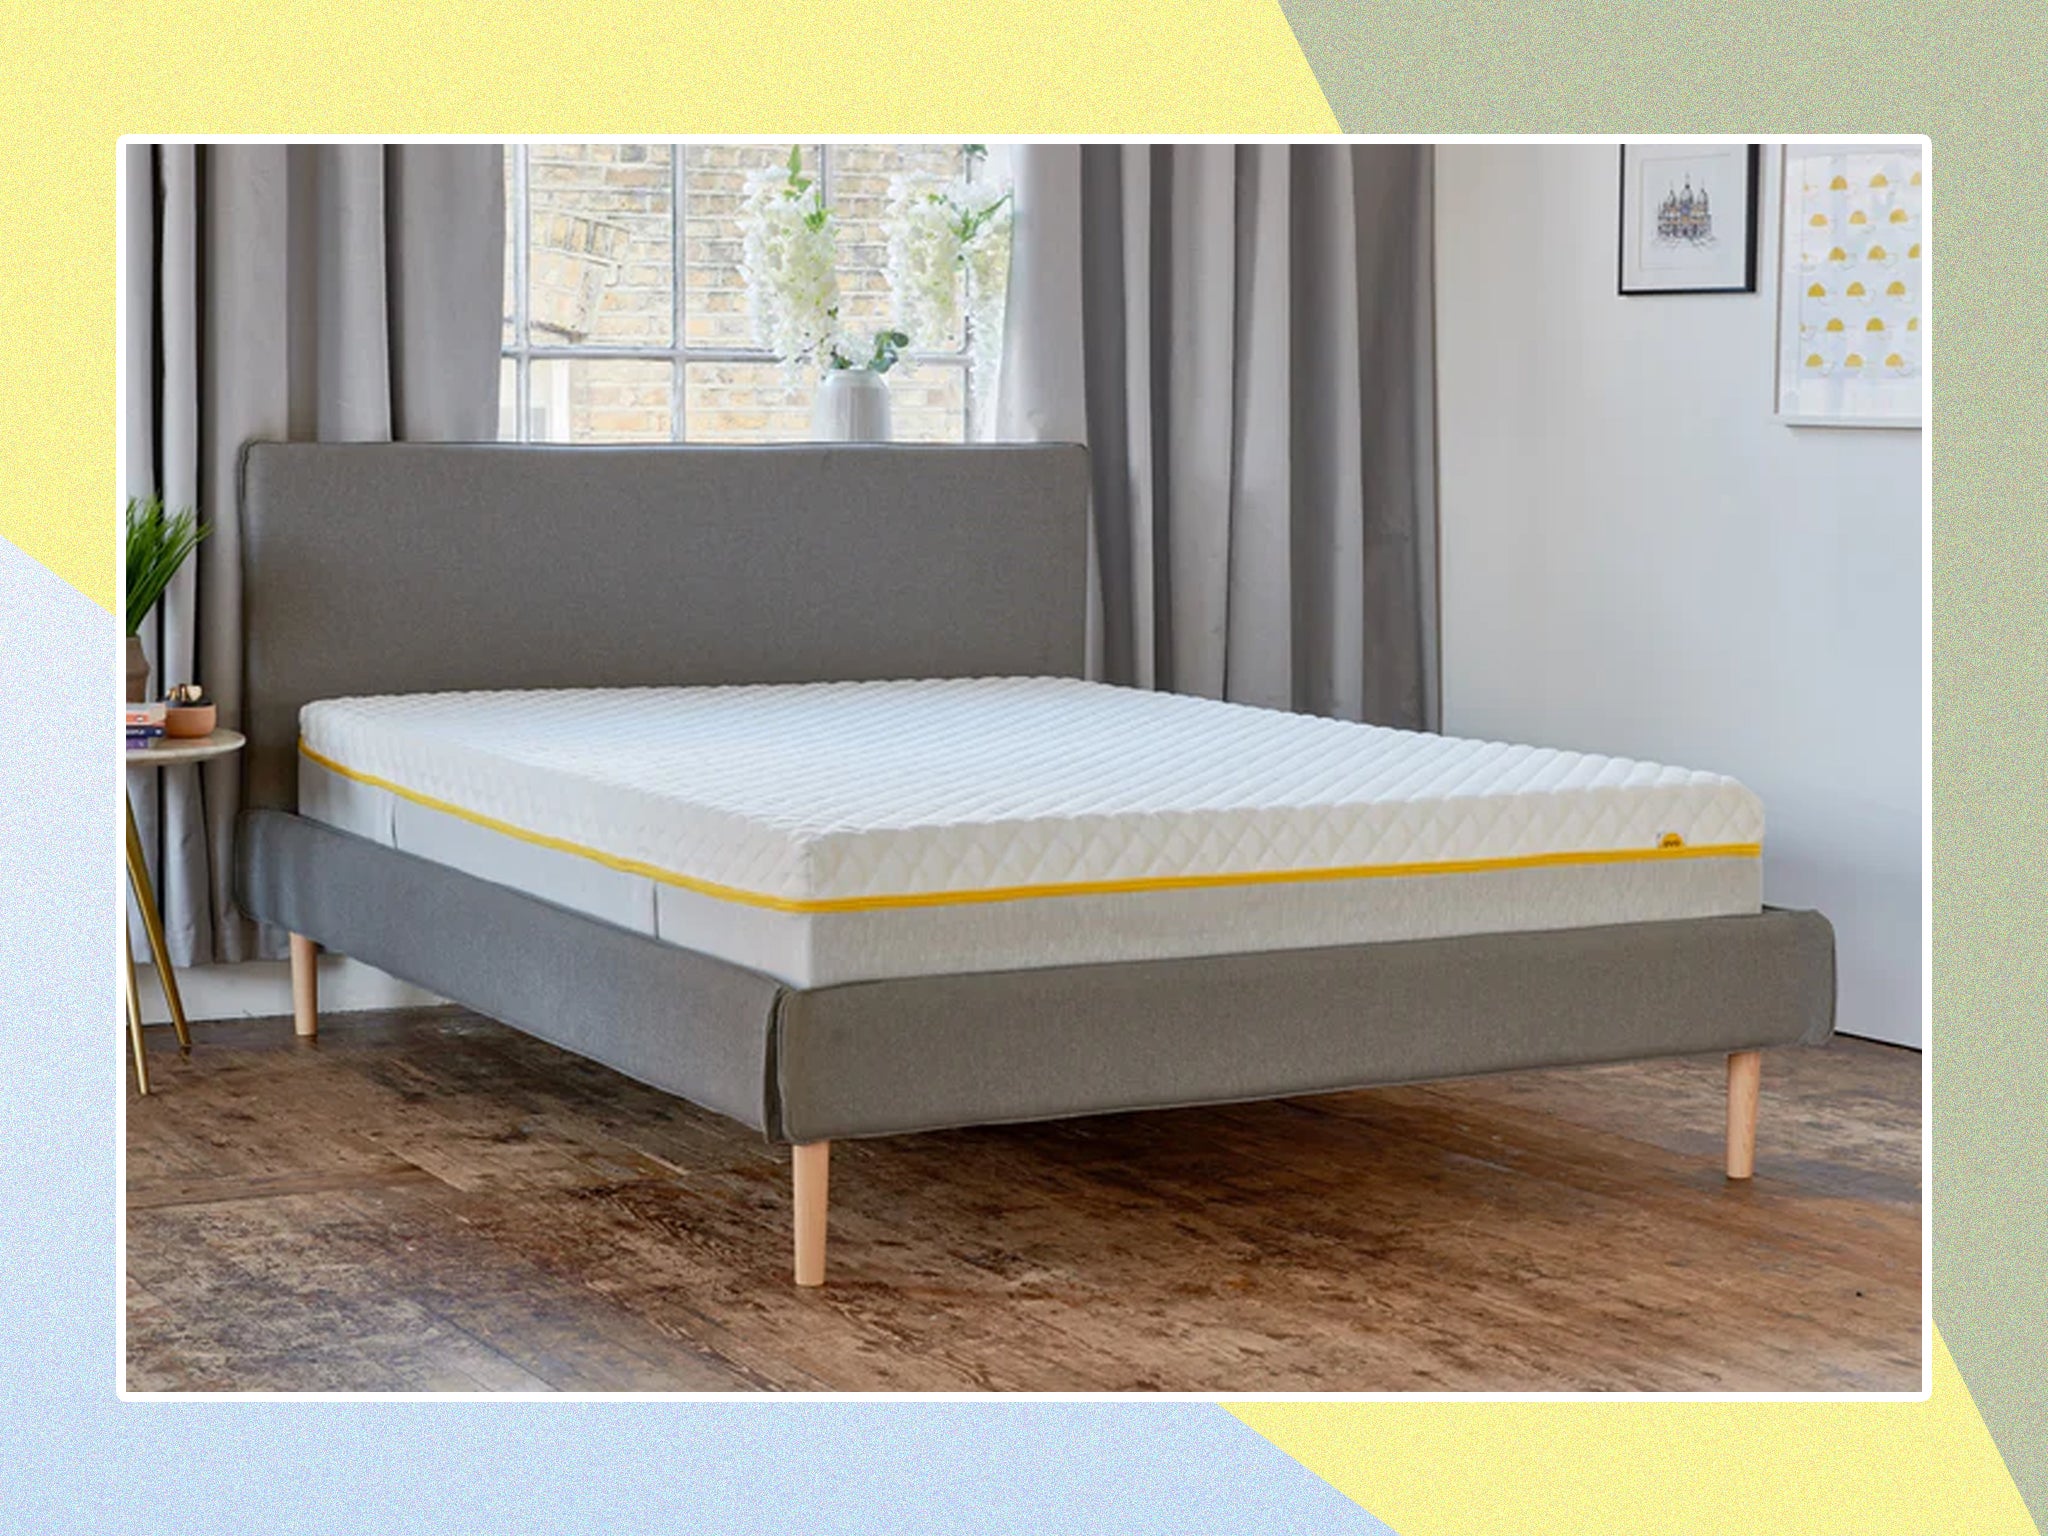 Eve is one the most recognisable bed-in-a-box brands, but how does its mattress fare?